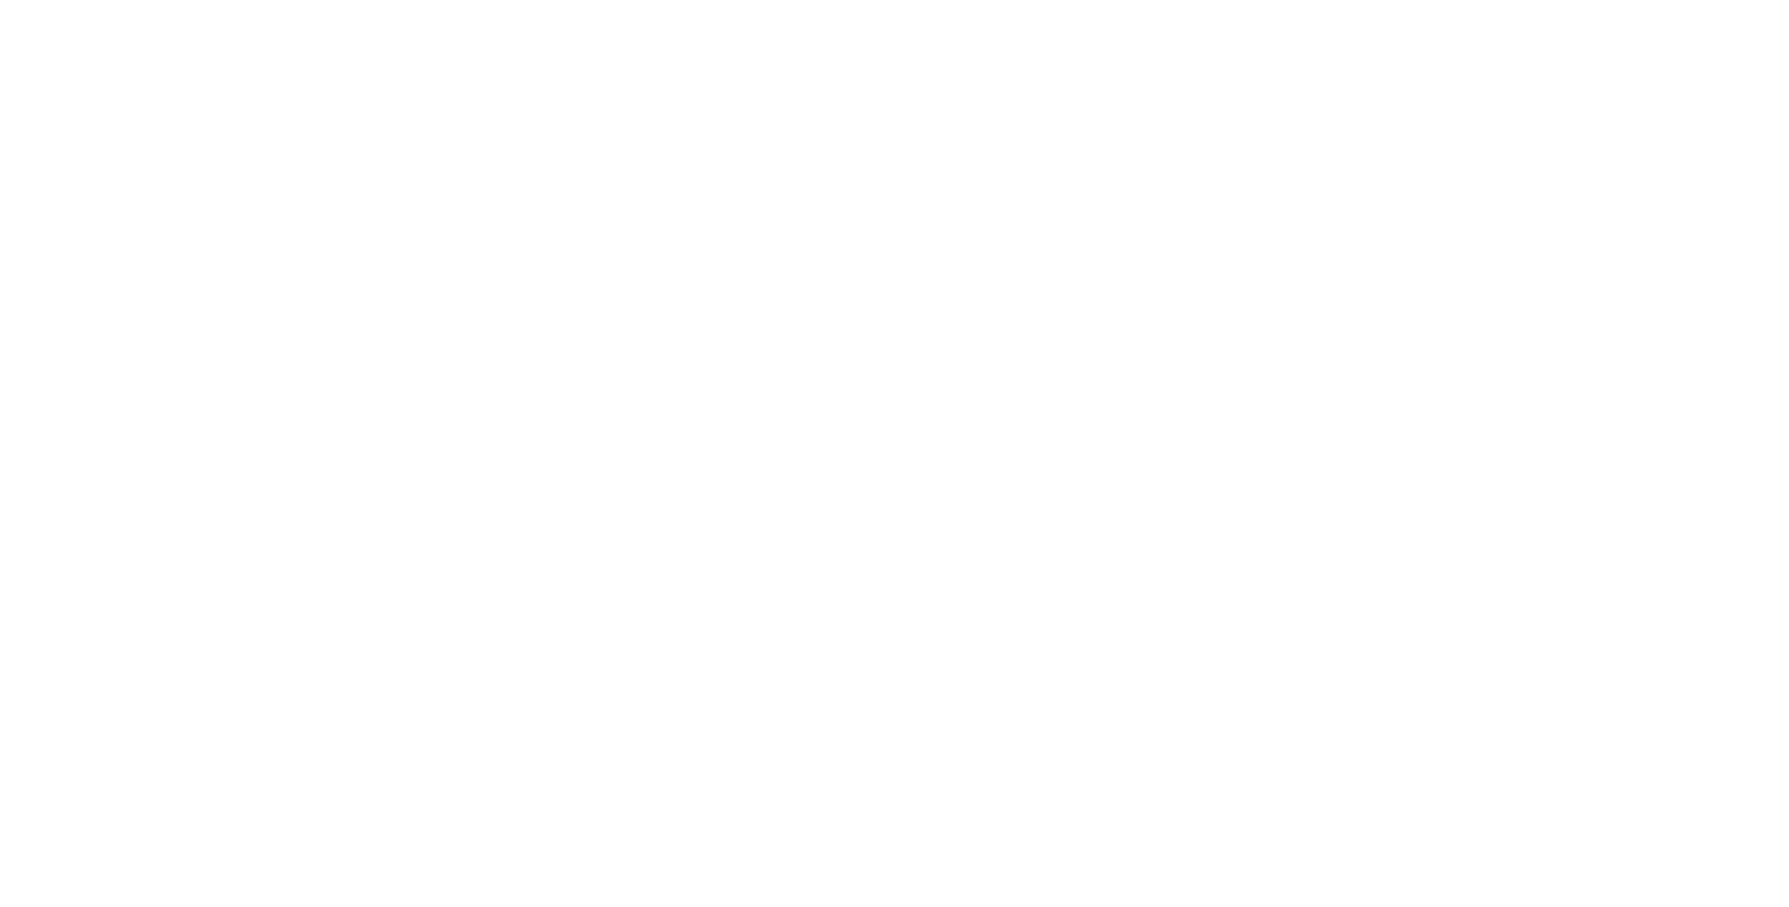 The logo picture of REAN FOUNDATION in white color